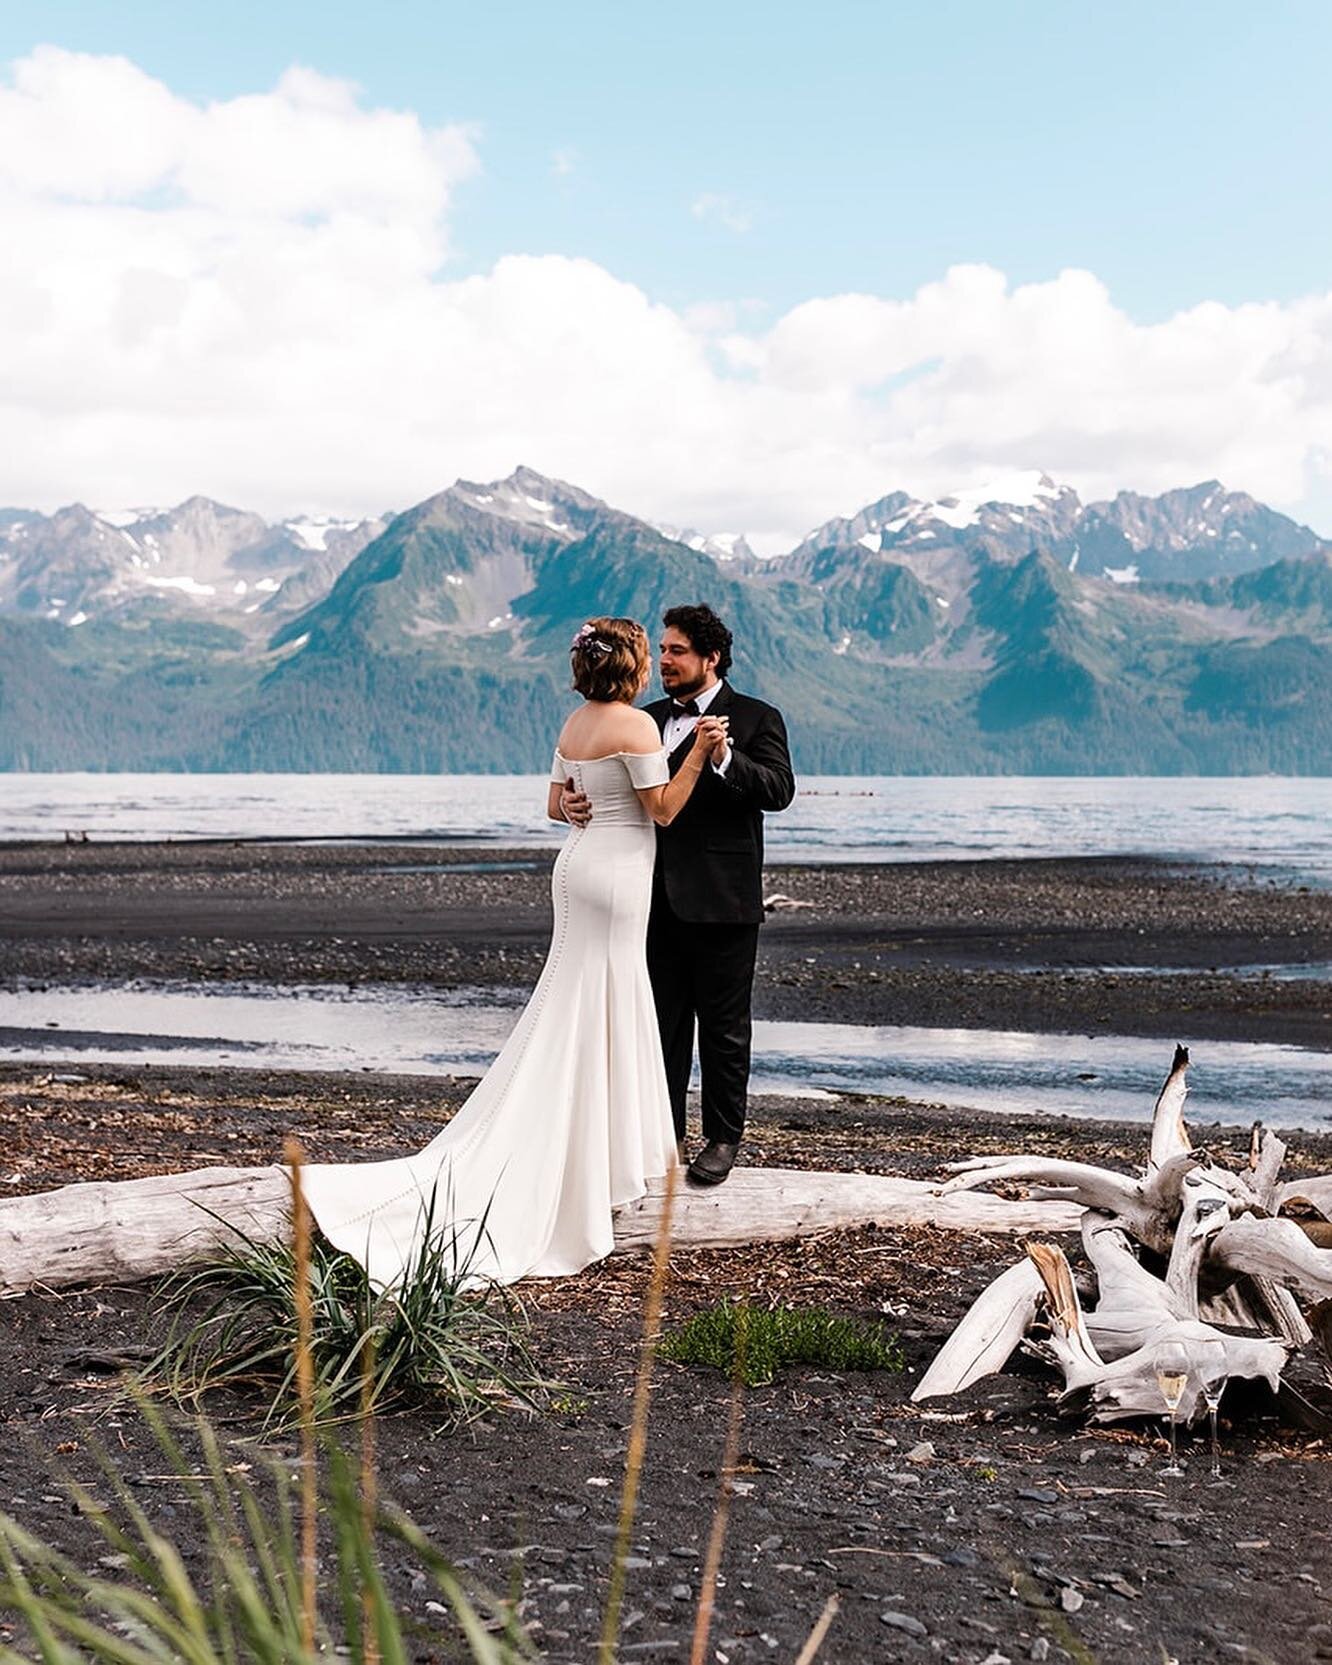 Why would someone want to elope in a place they&rsquo;ve never been to before? We get this question a lot &mdash; it&rsquo;s something that often surprises people: the fact that a lot of our couples are seeing the place for the first time when they c